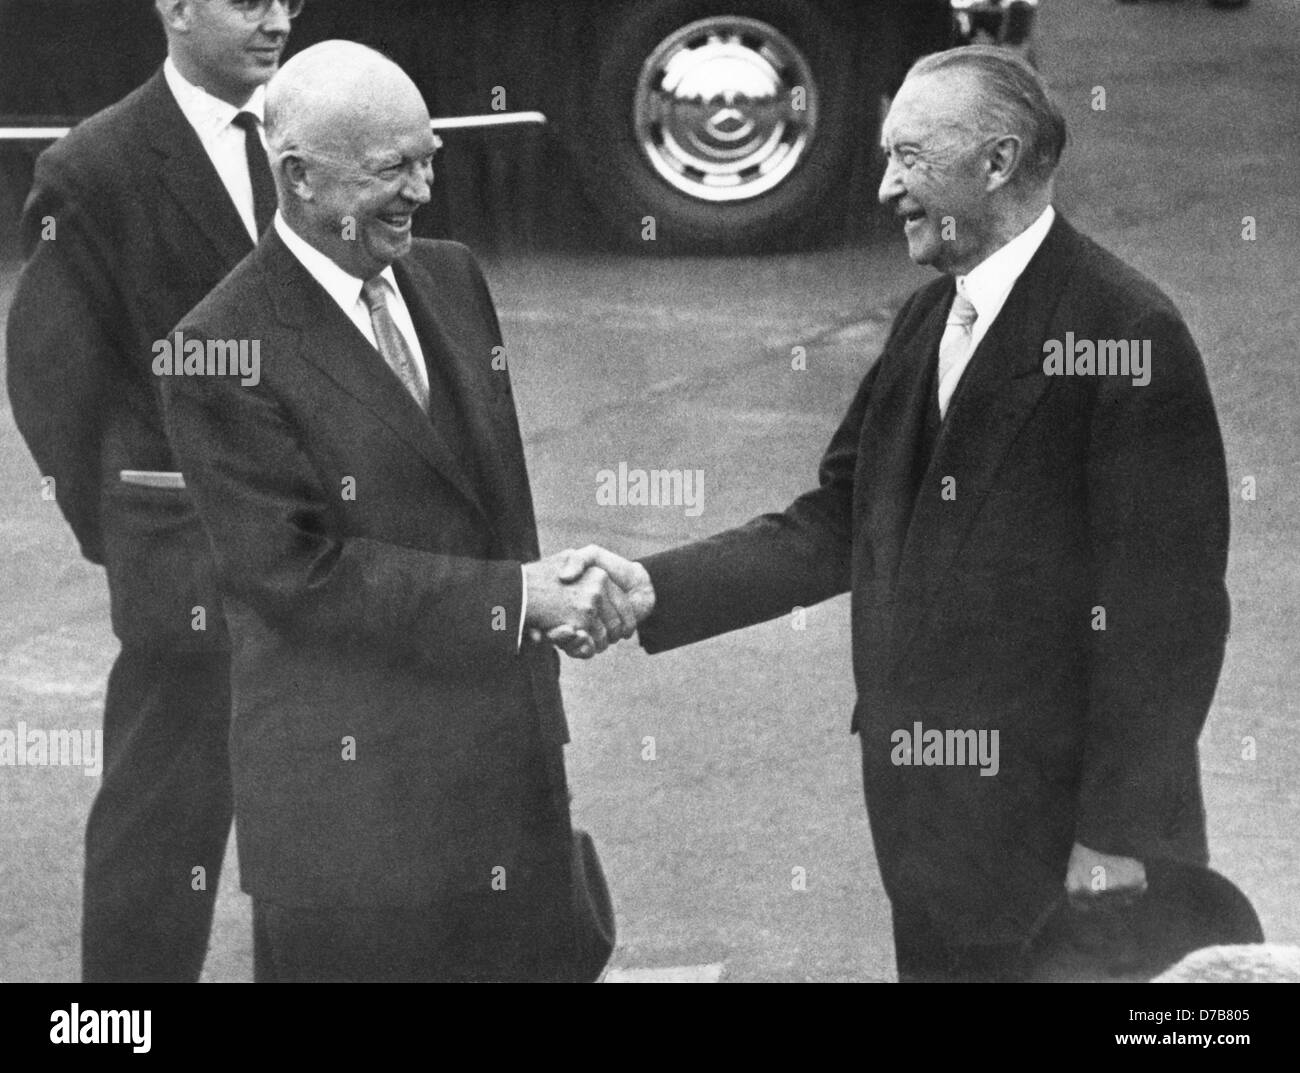 American president Dwight D. Eisenhower (l) is welcomed by German chancellor Konrad Adenauer after his arrival in Bonn on the 26th of August in 1959. Eisenhower arrived for a one-day visit to the Federal Republic of Germany. Stock Photo